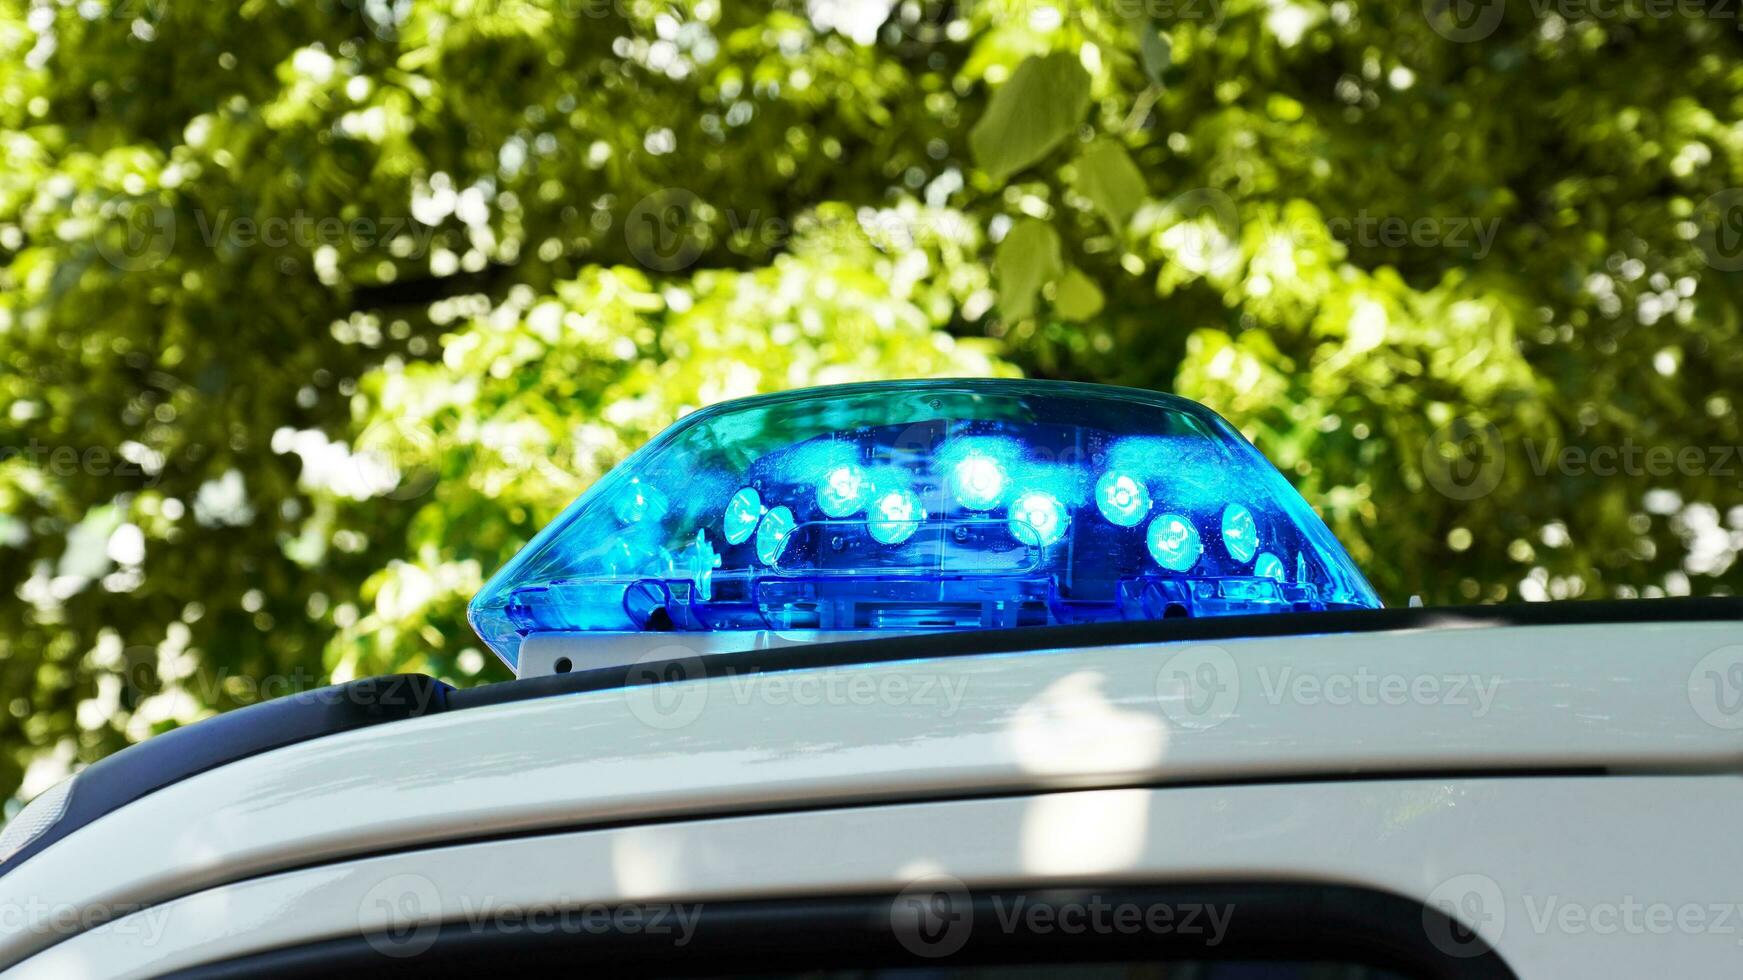 emergency blue light on police car roof known as Blaulicht in Germany photo